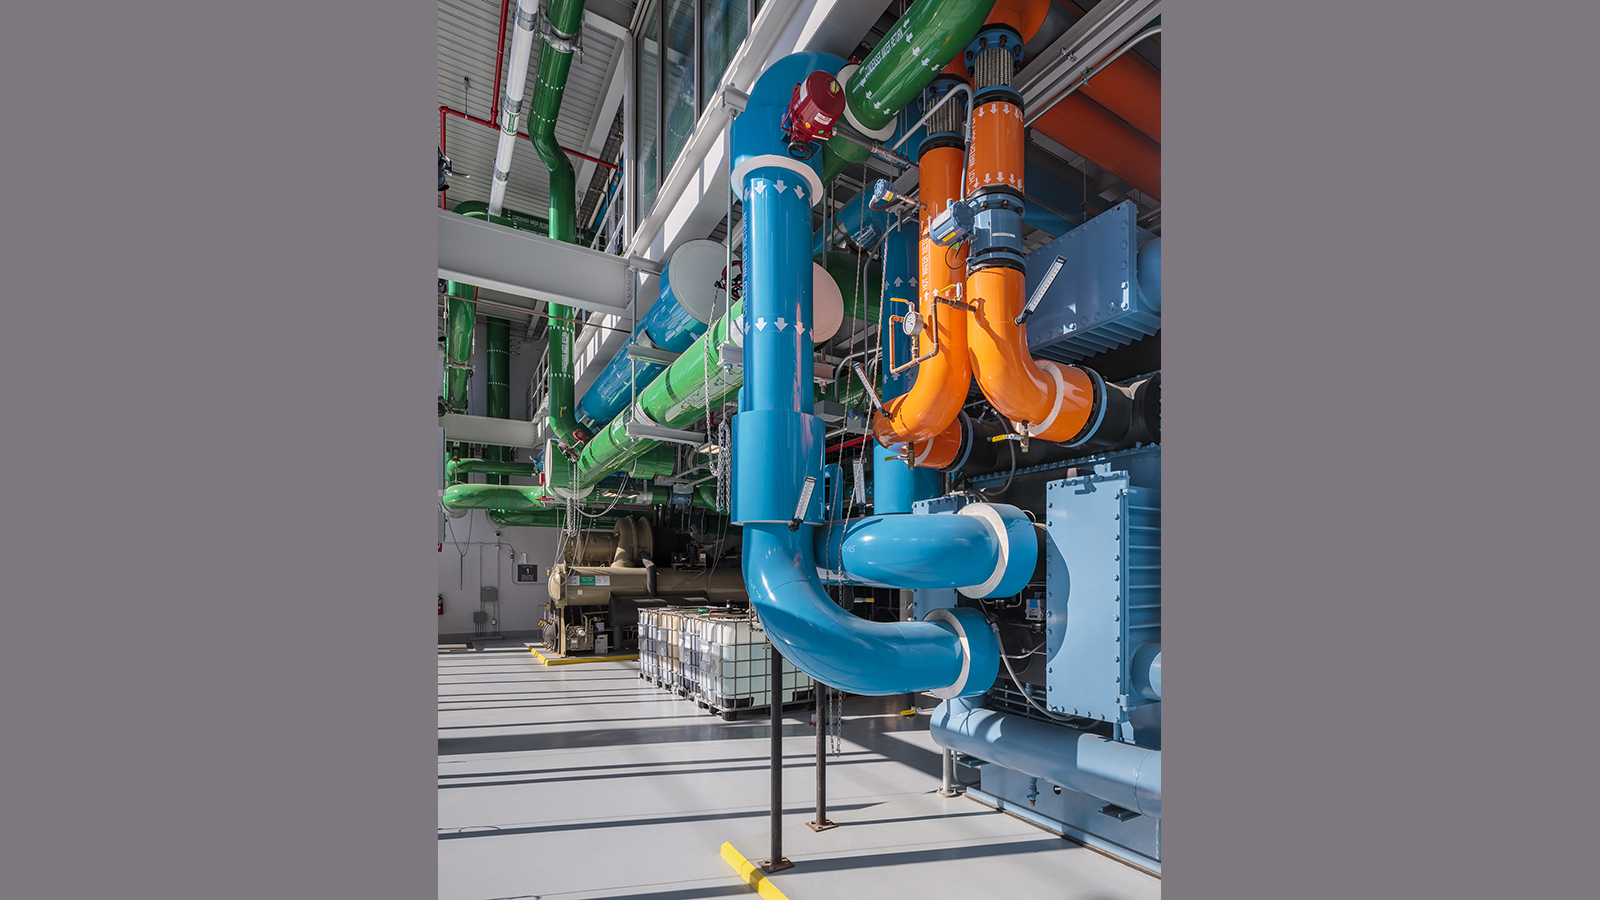 Tufts University Central Energy Plant Interior, blue, green, and orange pipes